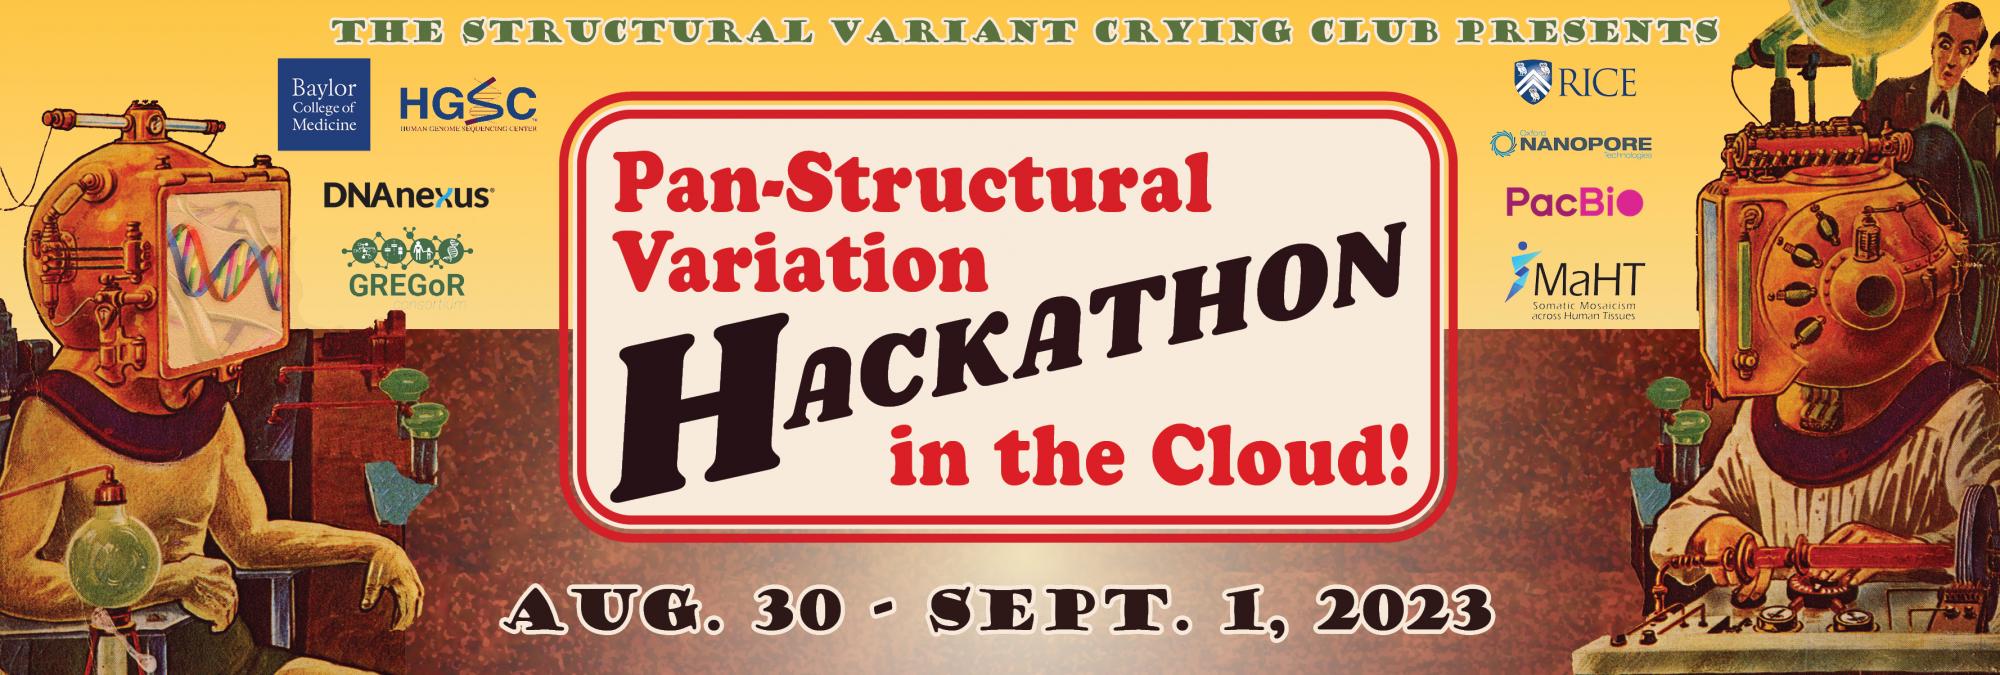 Pan Structural Variation Hackathon in the Cloud - Aug. 30 - Sept. 1, 2023